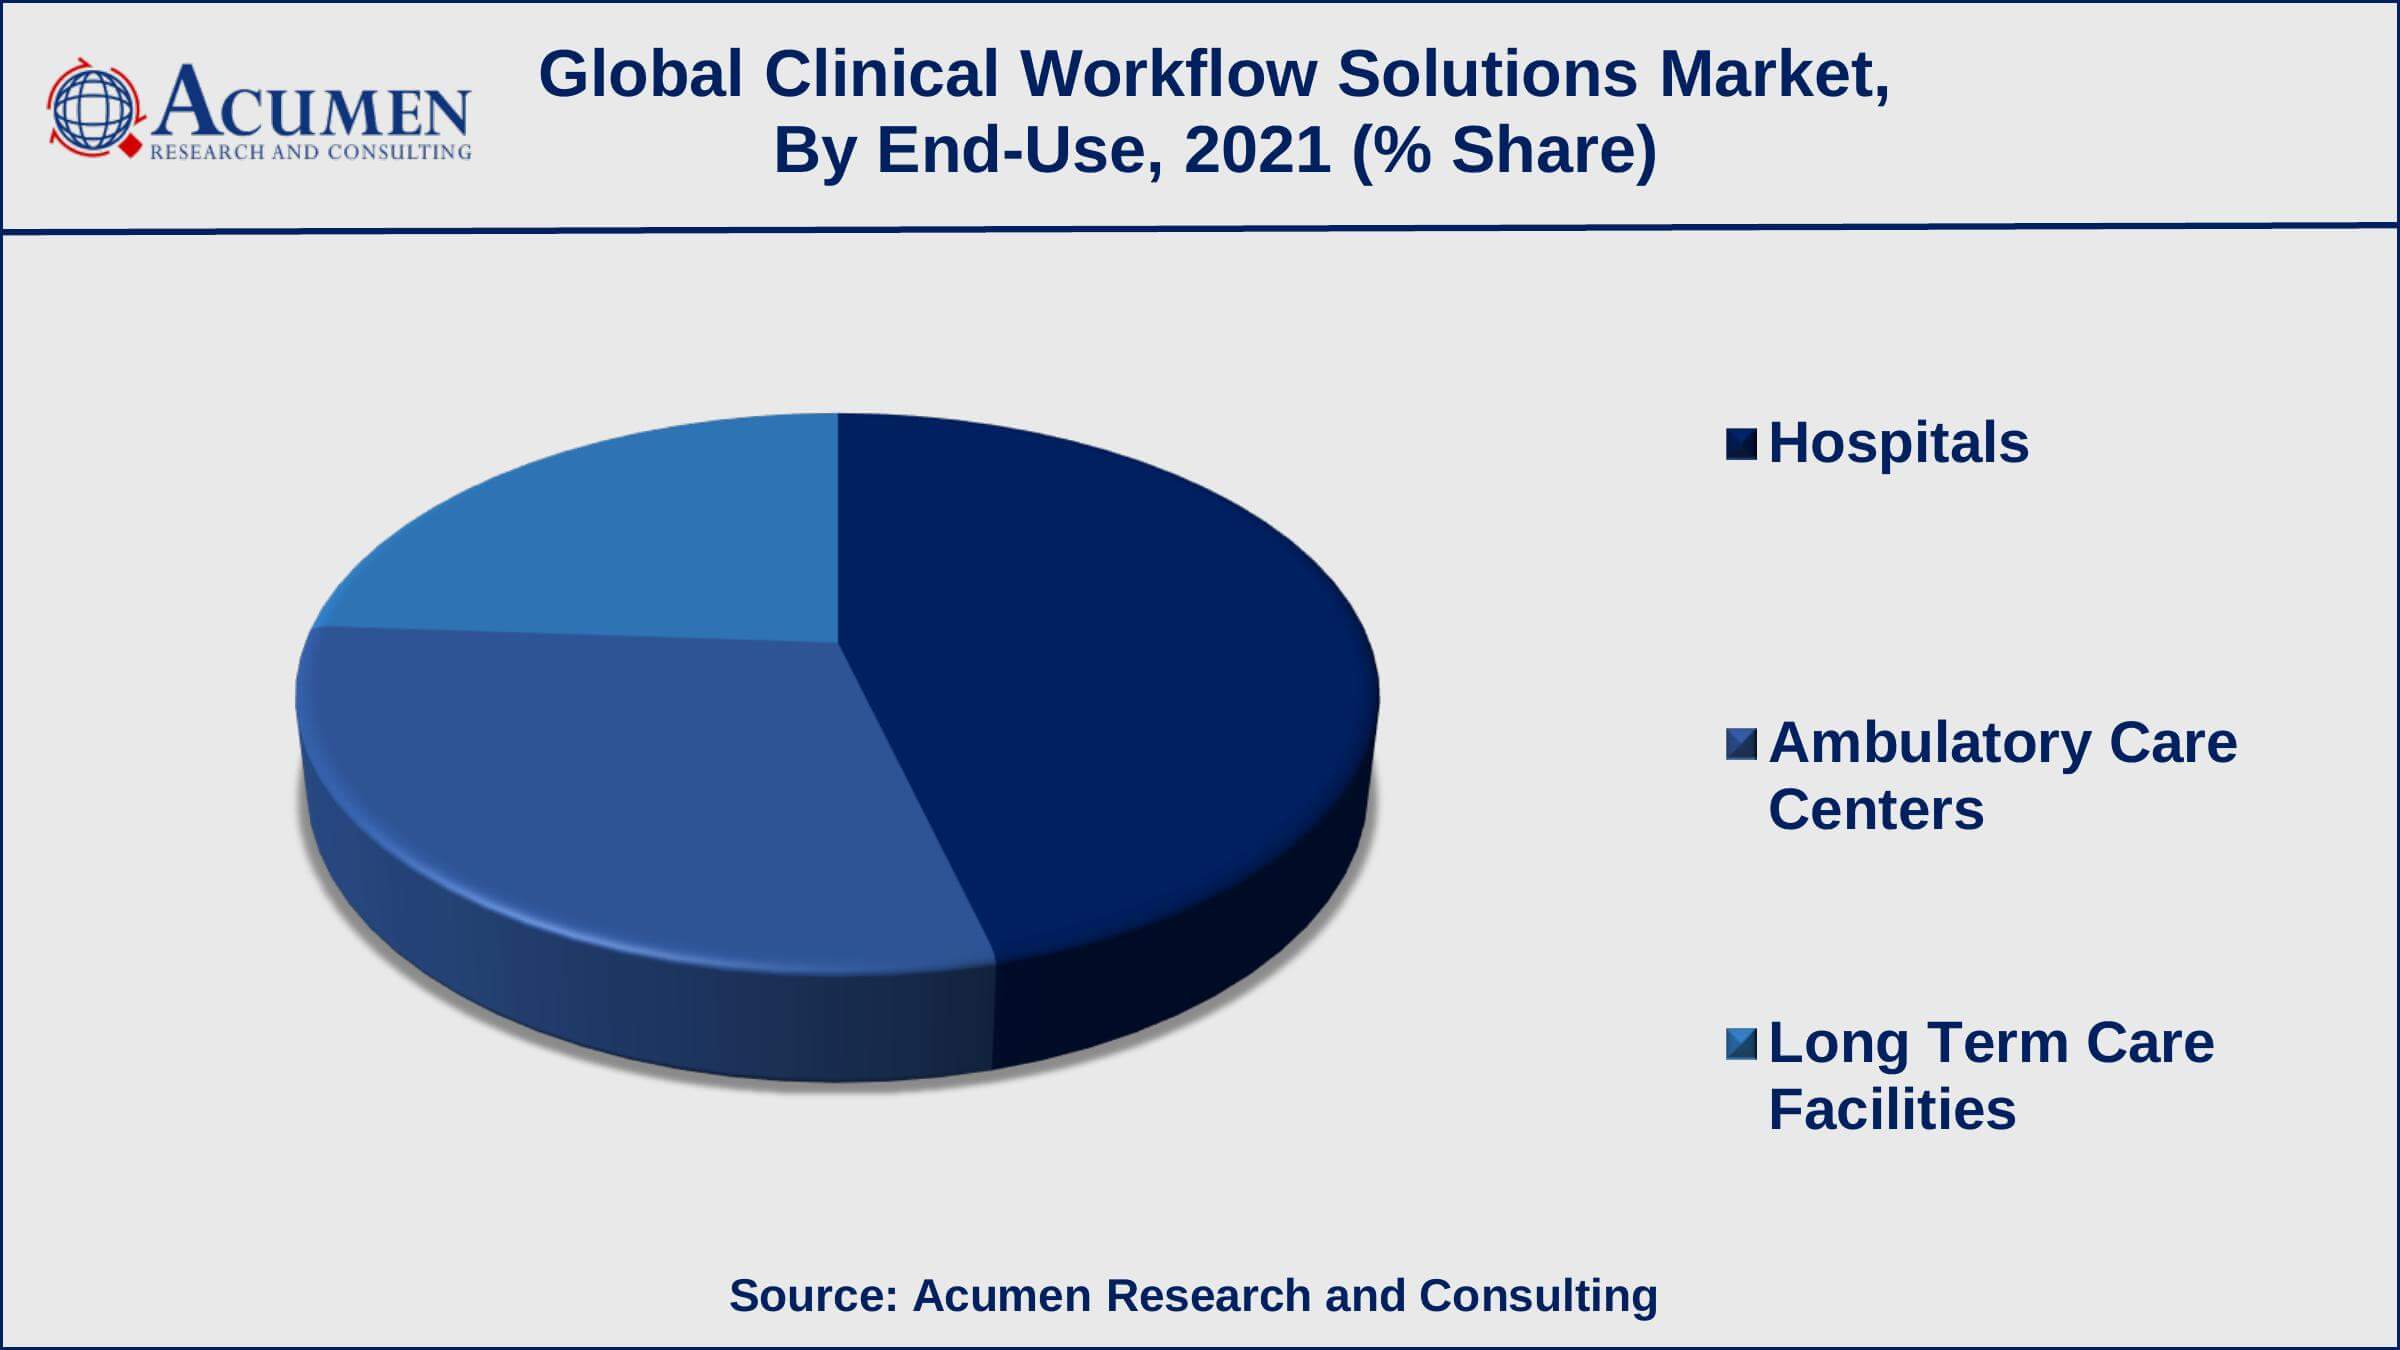 Global Clinical Workflow Solutions Market Dynamics